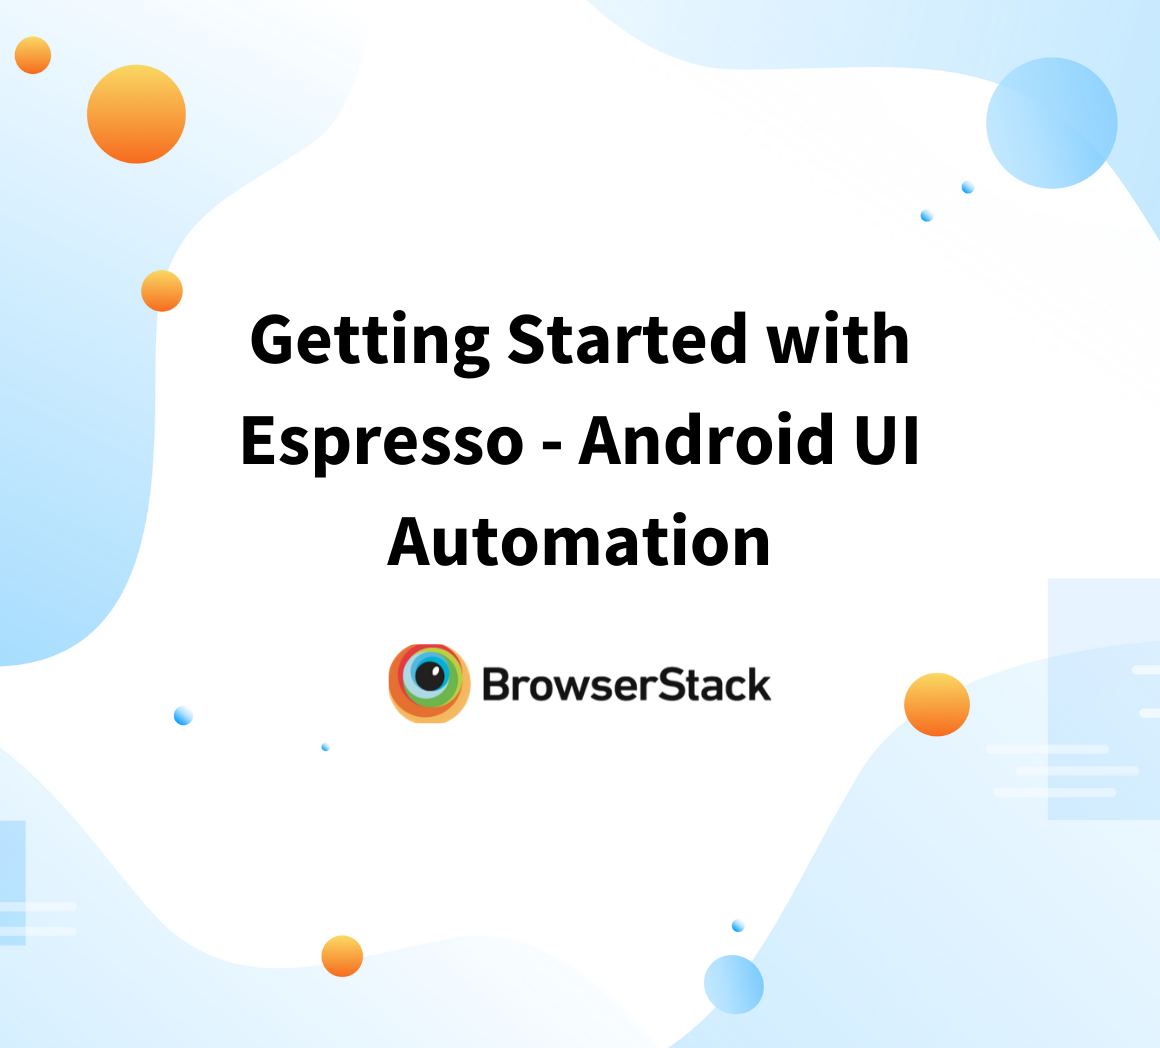 Getting Started with Espresso - Android UI Automation